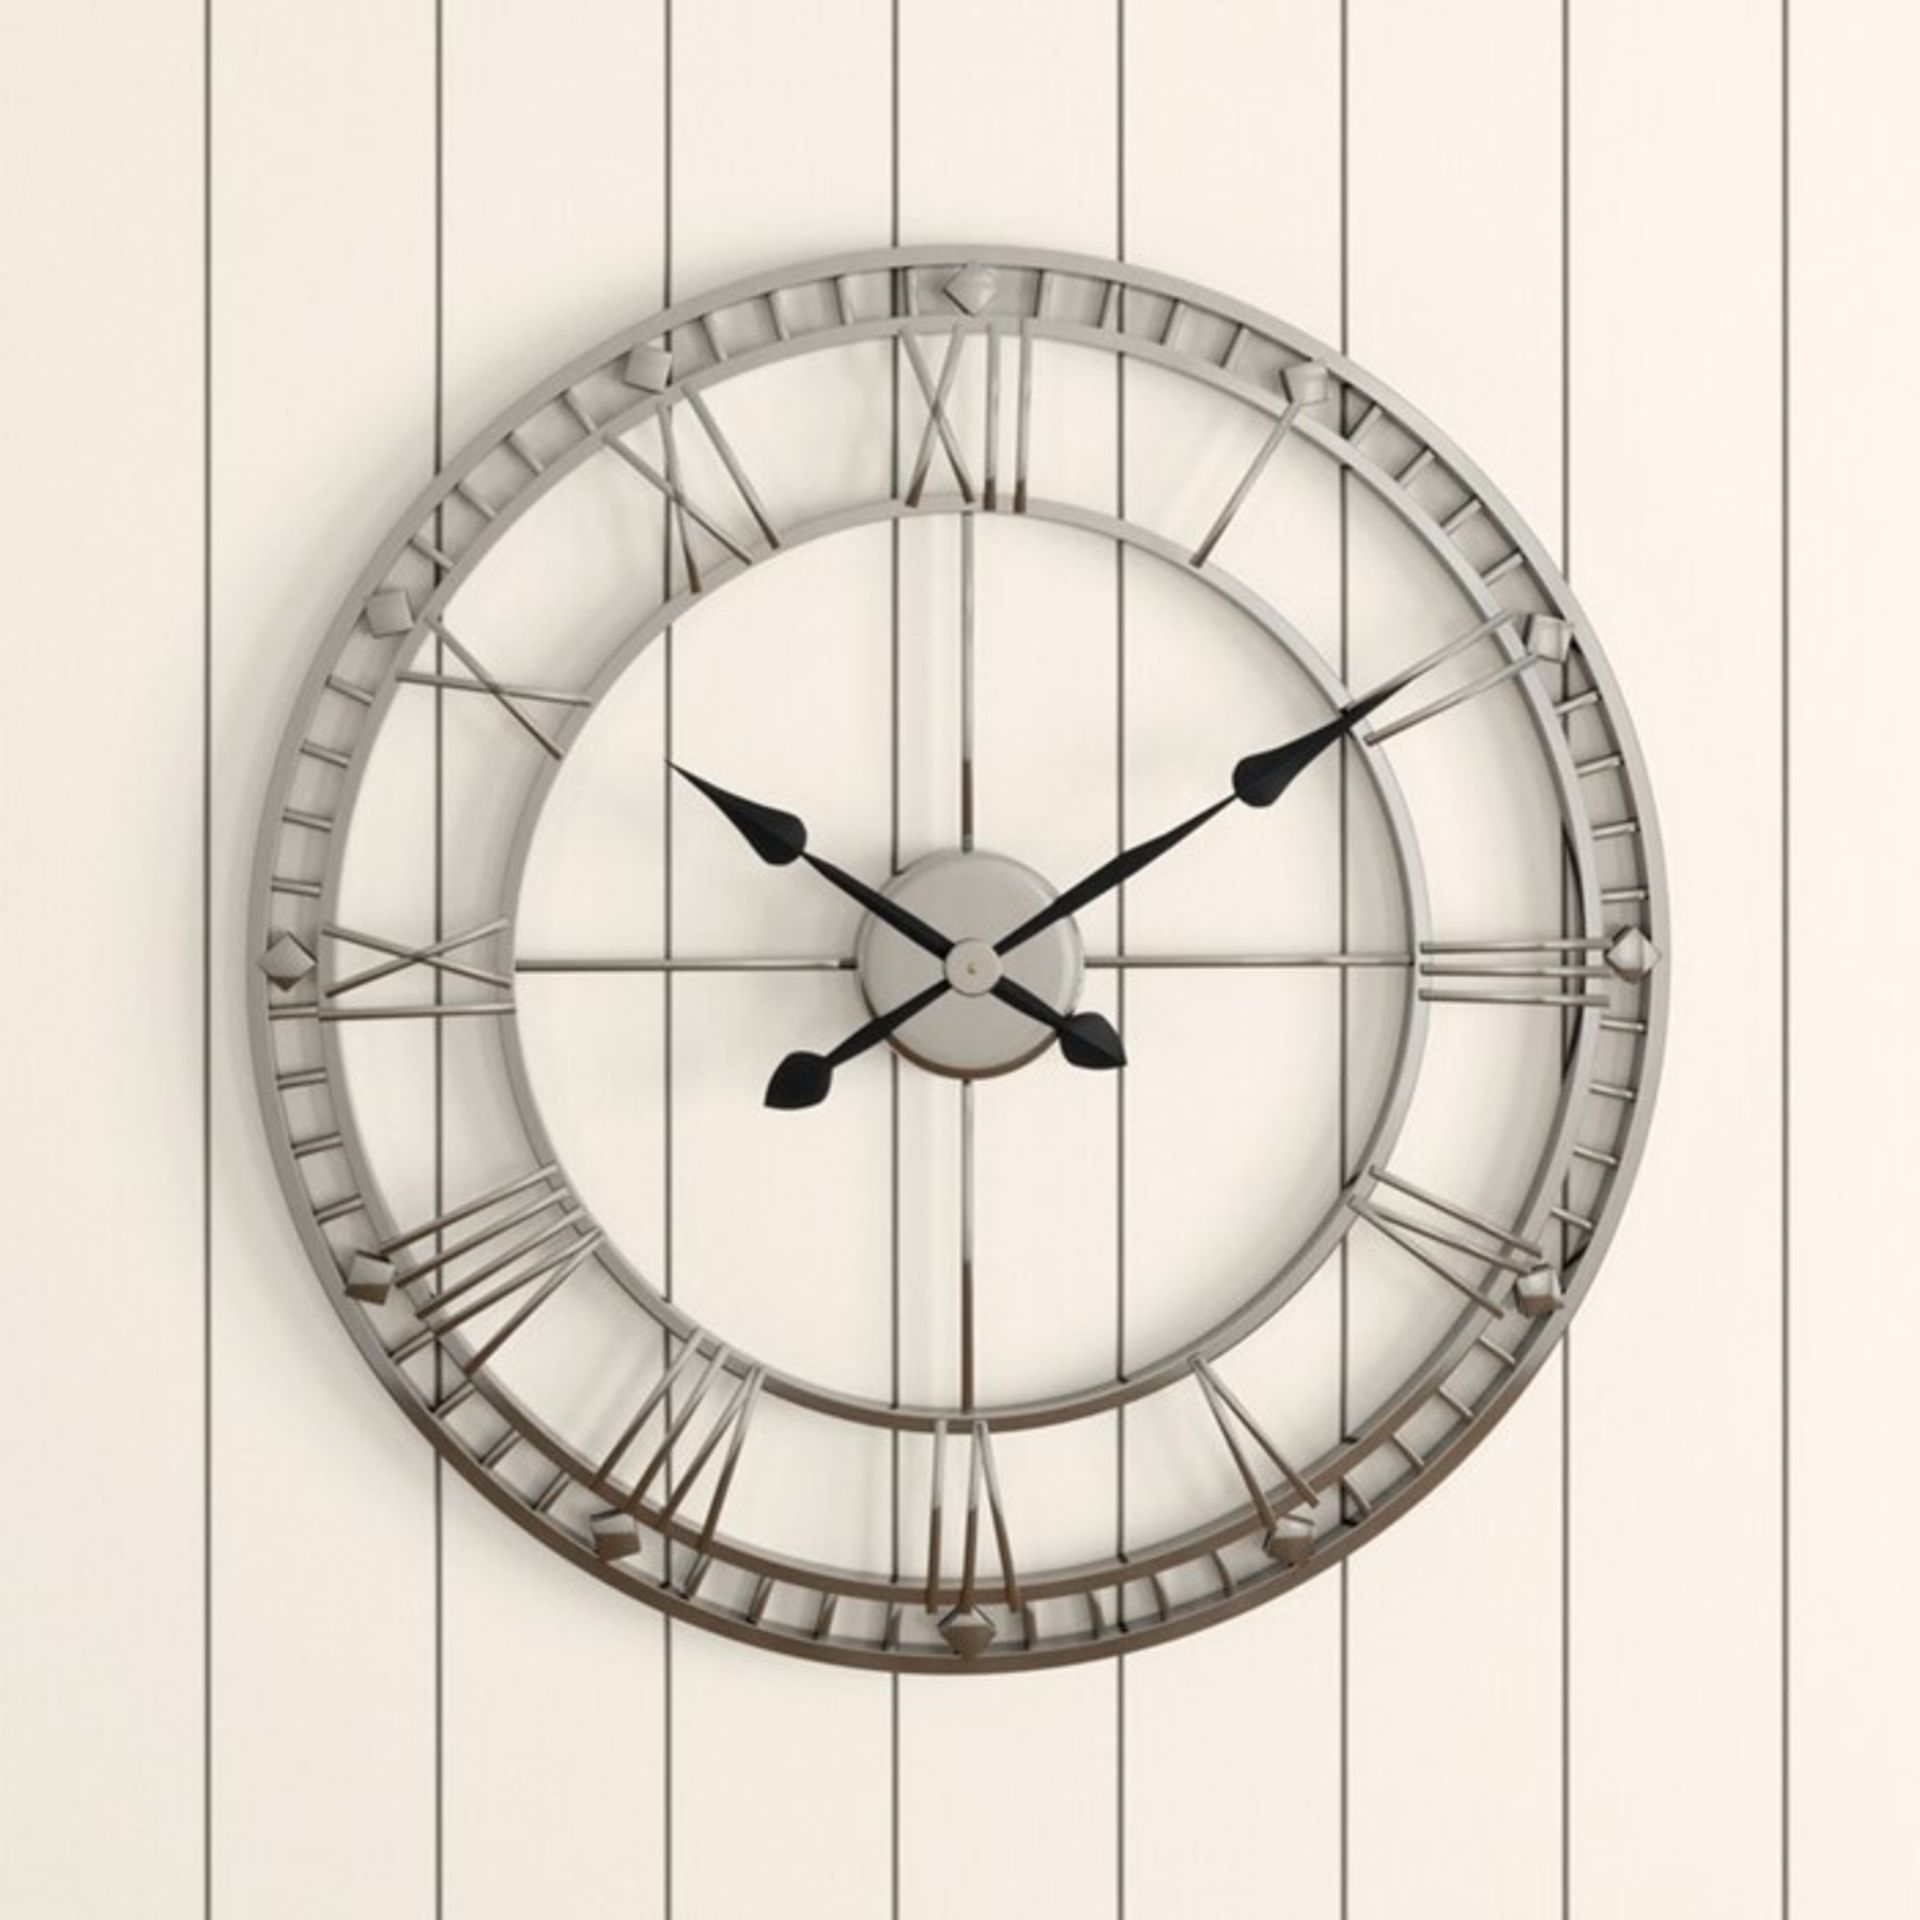 Laurel Foundry, Melody Oversized Metal Round 80cm Wall Clock RRP £76.99 (PACH7817 - 13652/9) 3C